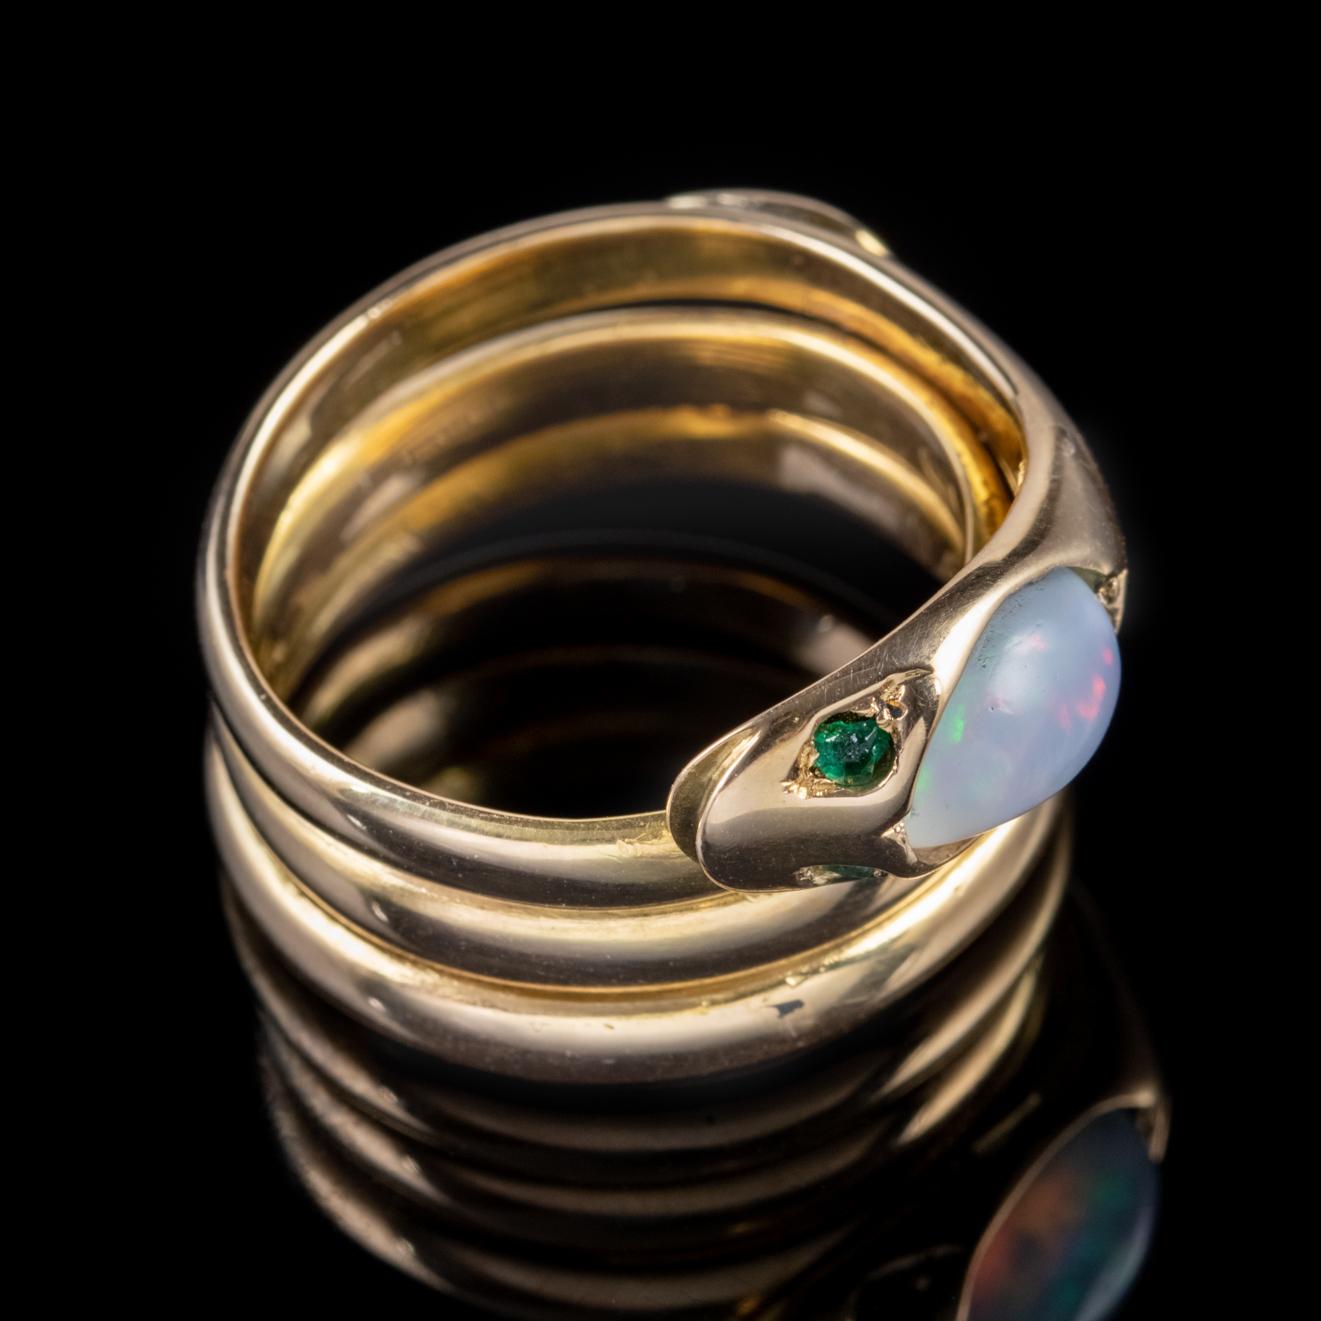 Antique Victorian Opal Snake Ring 18 Carat Gold Emerald Eyes Dated 1872 In Good Condition For Sale In Lancaster, Lancashire